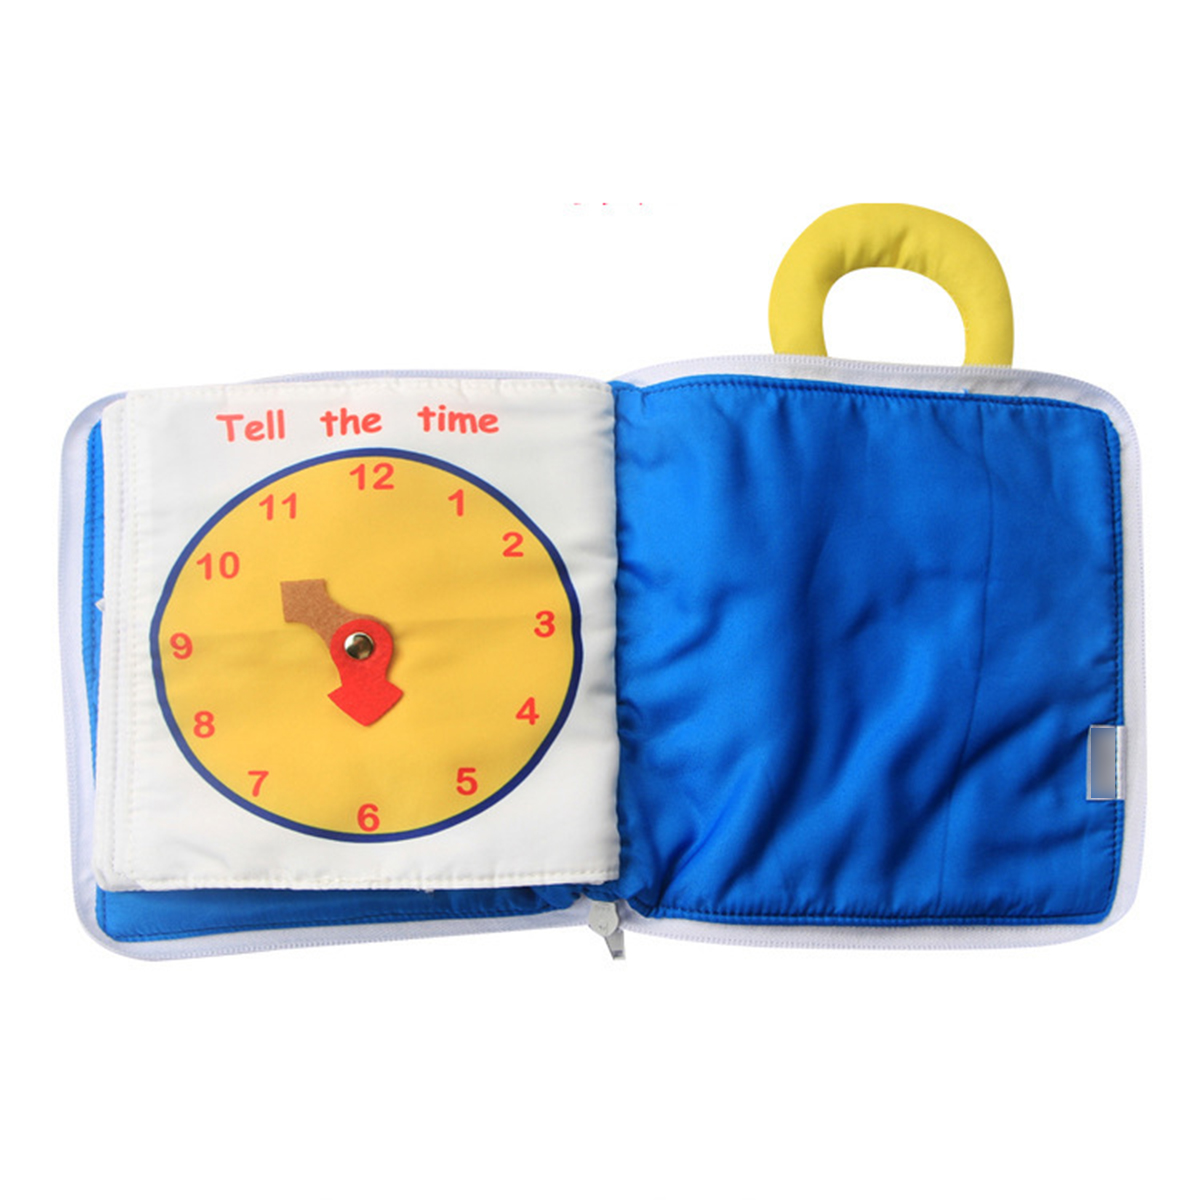 Infant Early Education Soft Cloth Books Baby Learning Activity Practice Hands Book Toys - Photo: 6